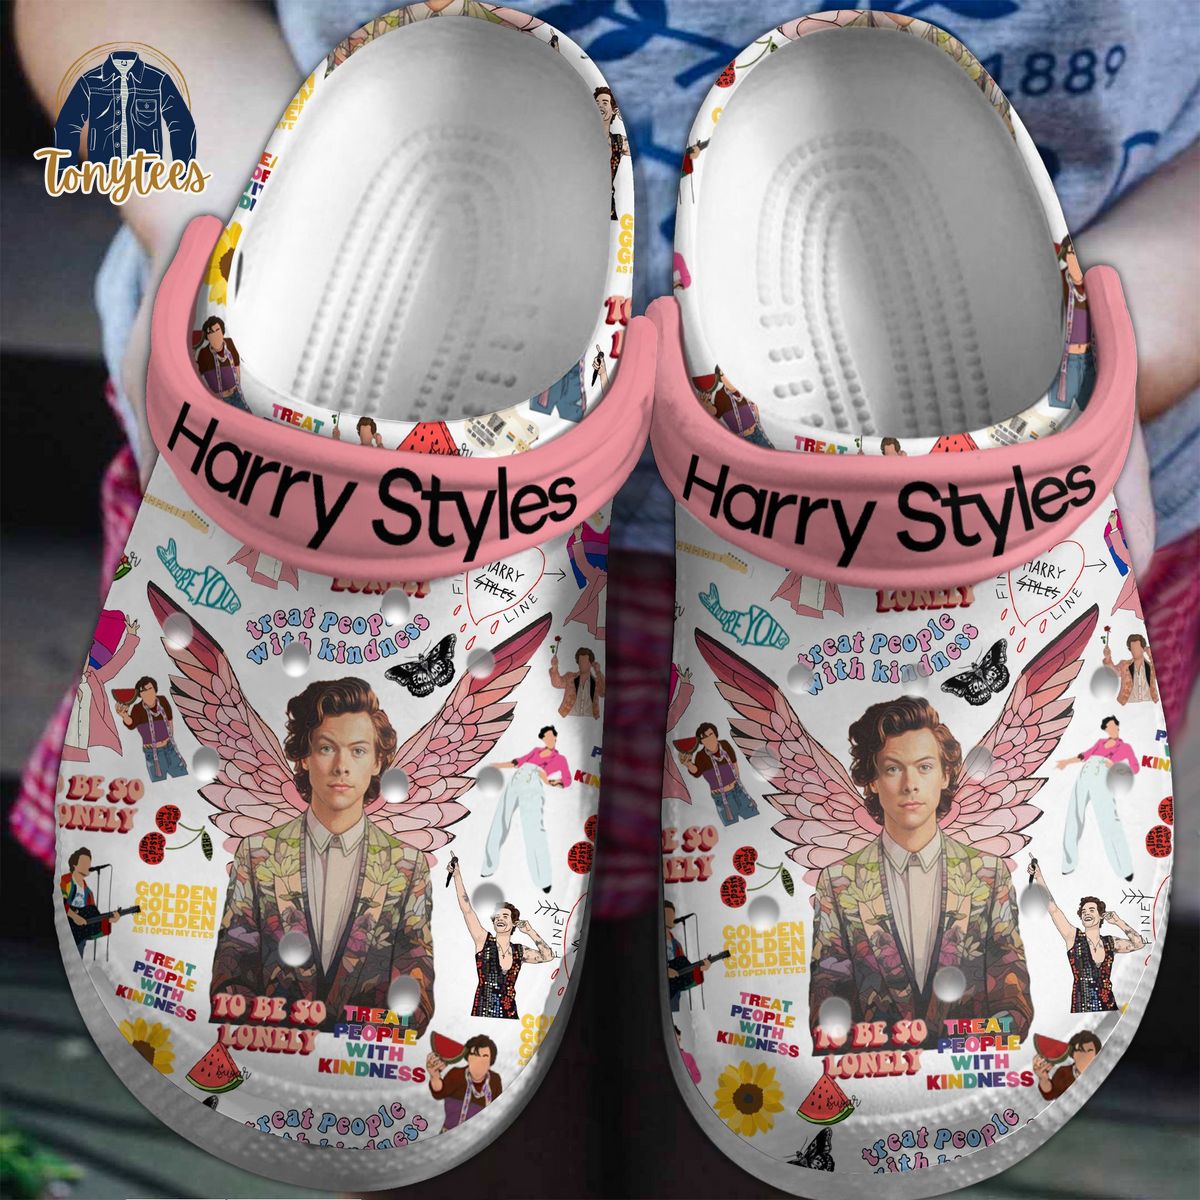 Harry Styles treat people with kindness crocs clogs